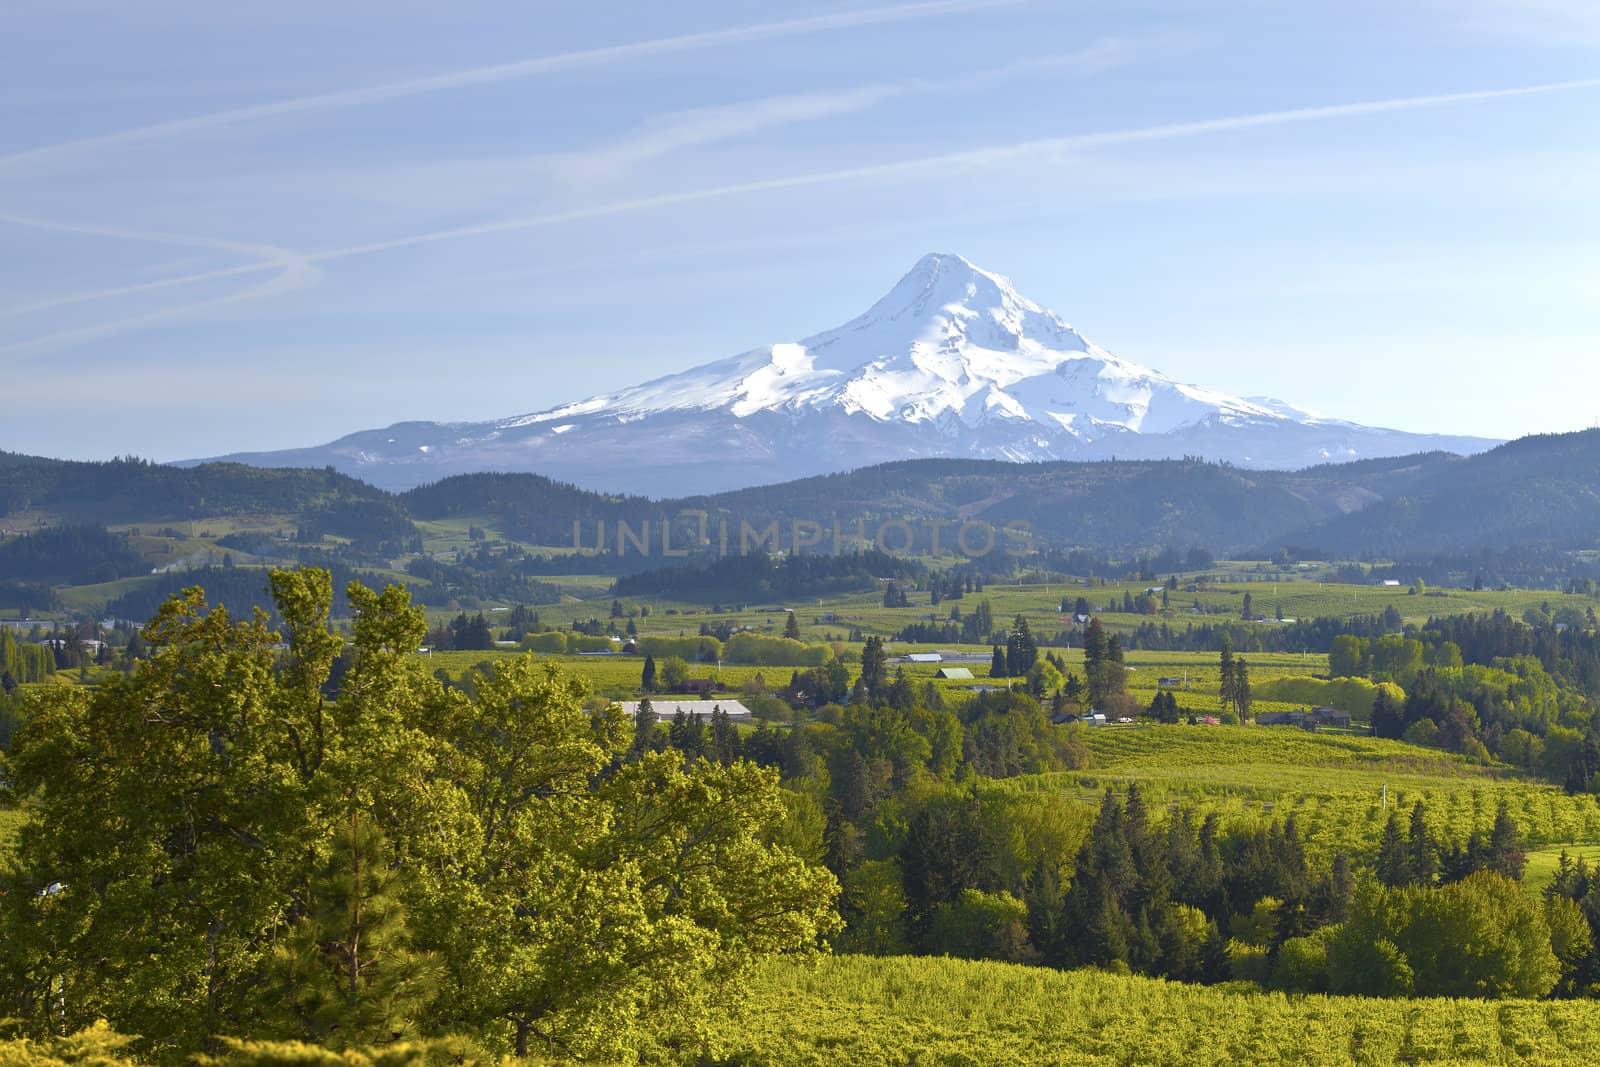 Mt. Hood and Hood River valley in Spring Oregon.